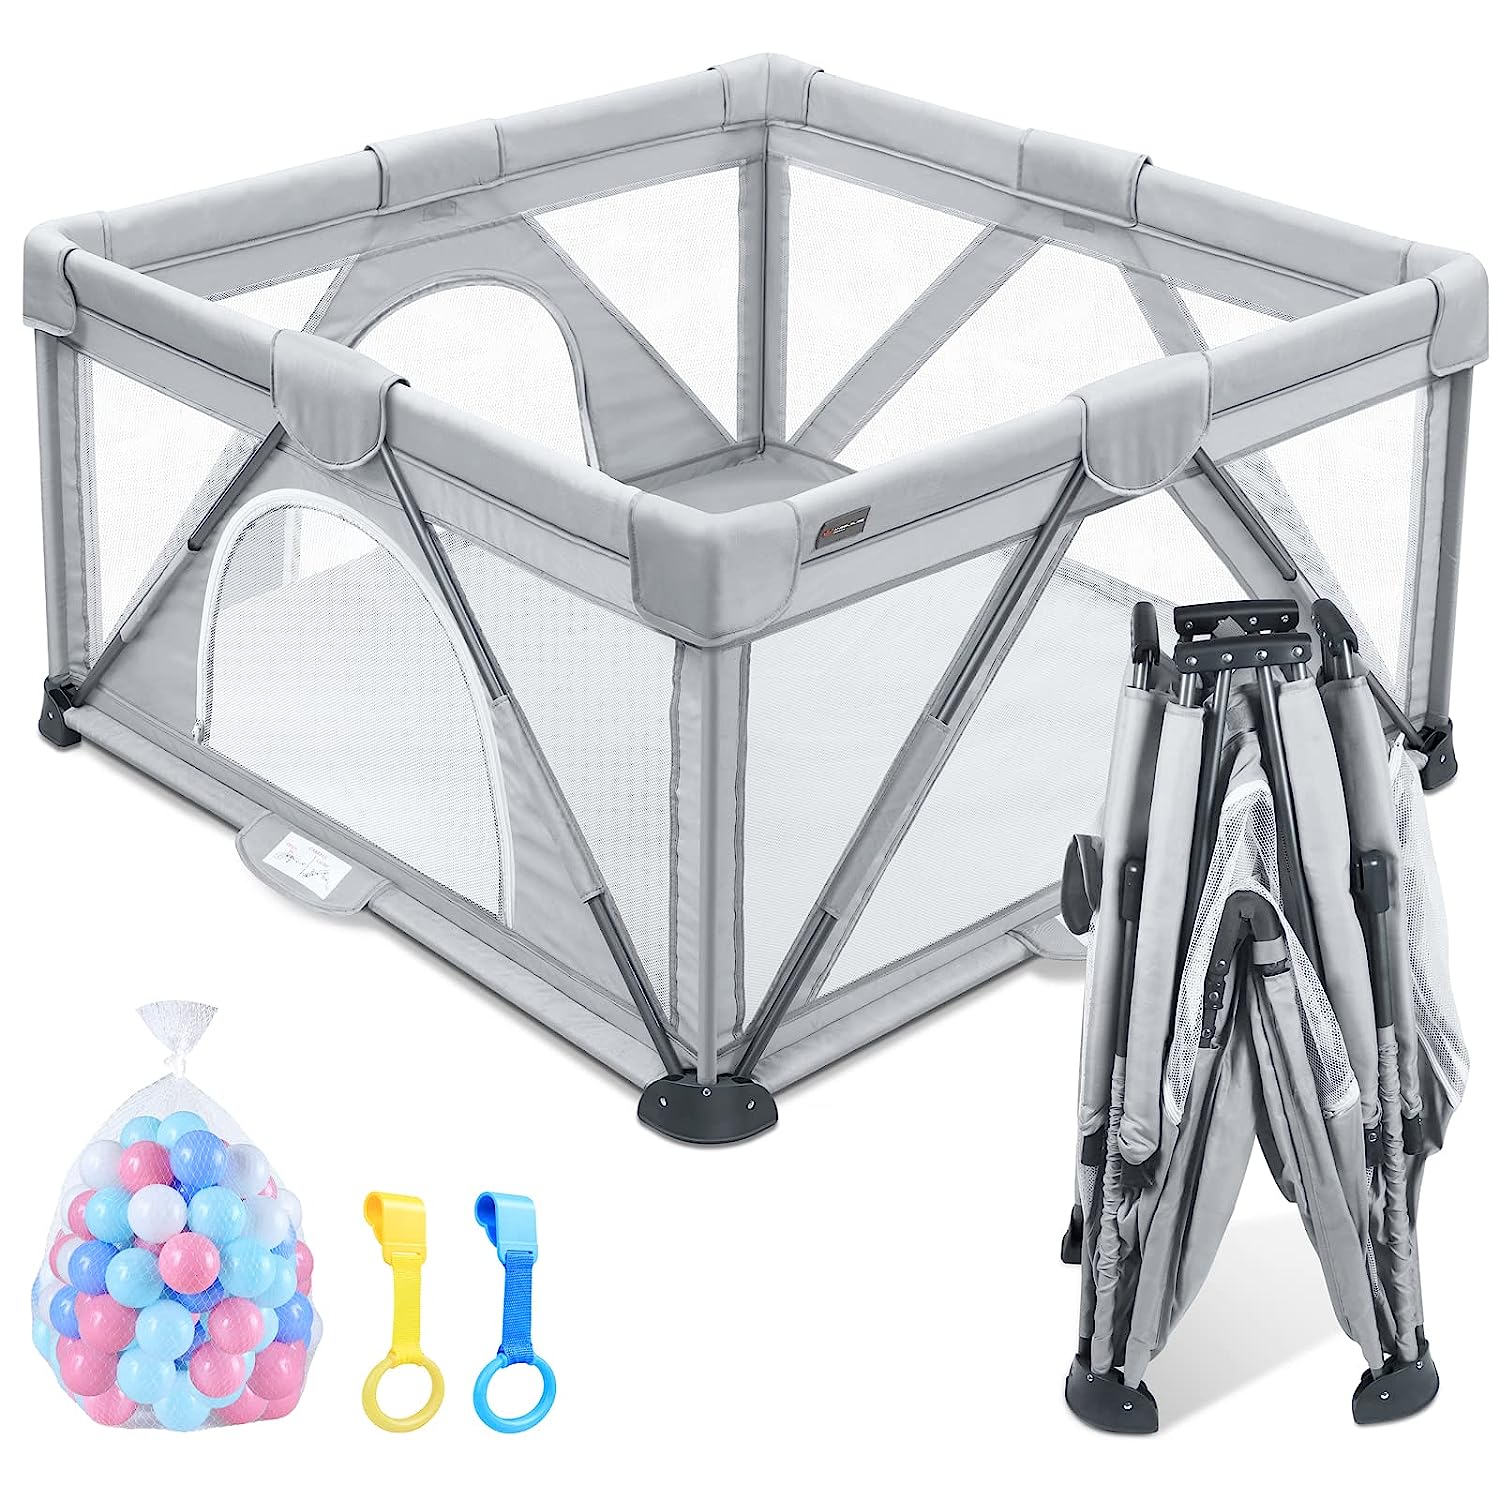 Gray visible breathable mesh baby playpen